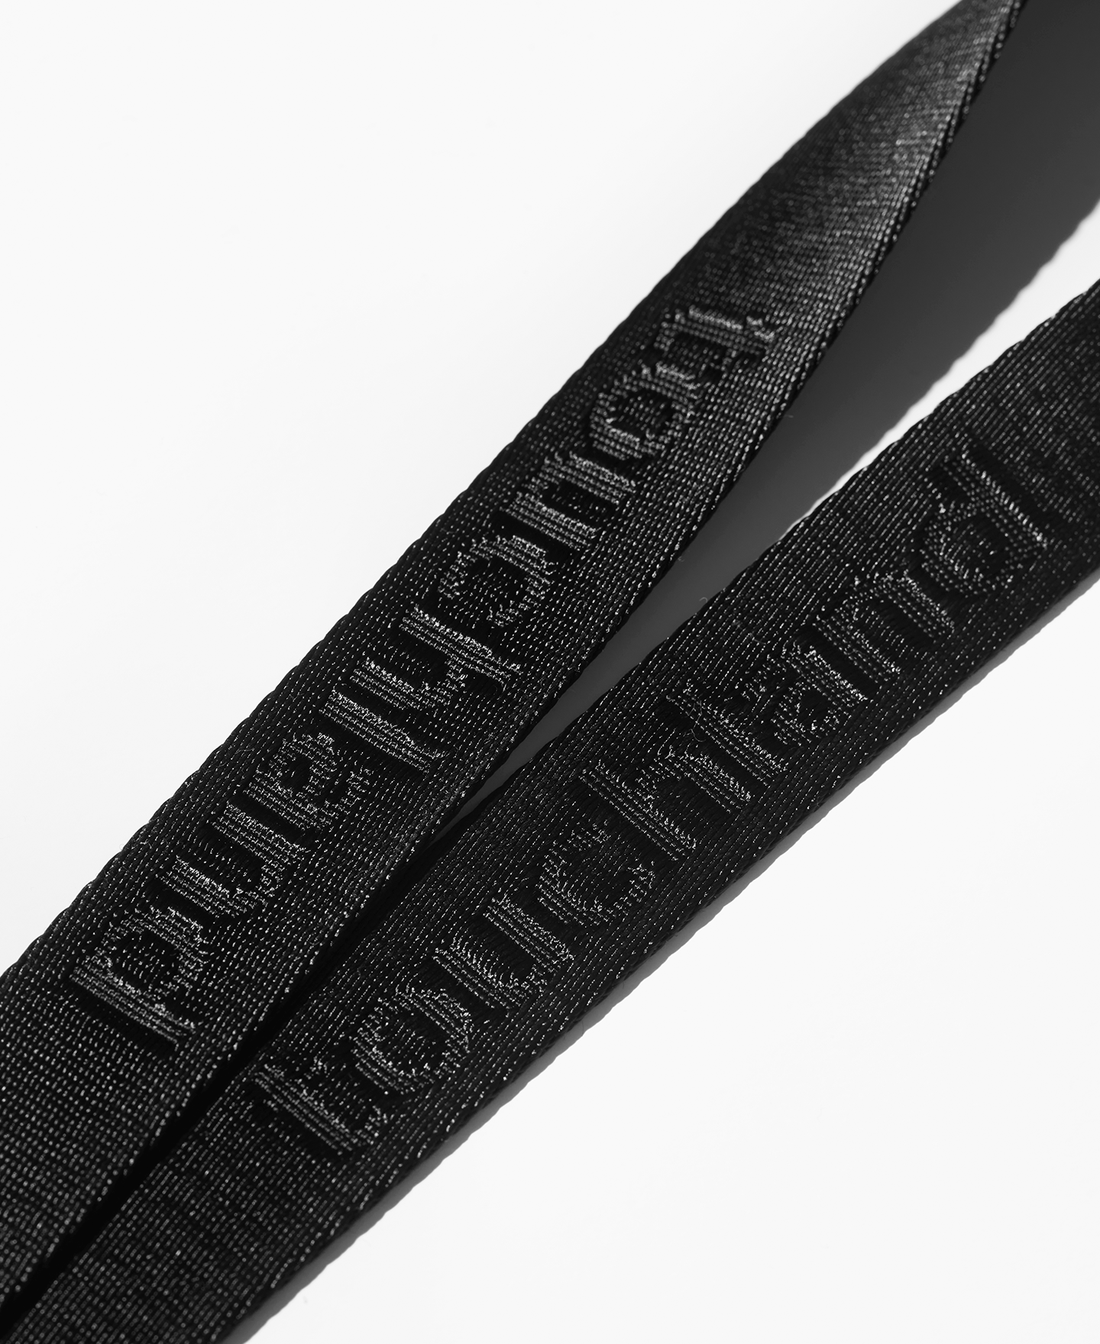 Black lanyard zoomed in on white background